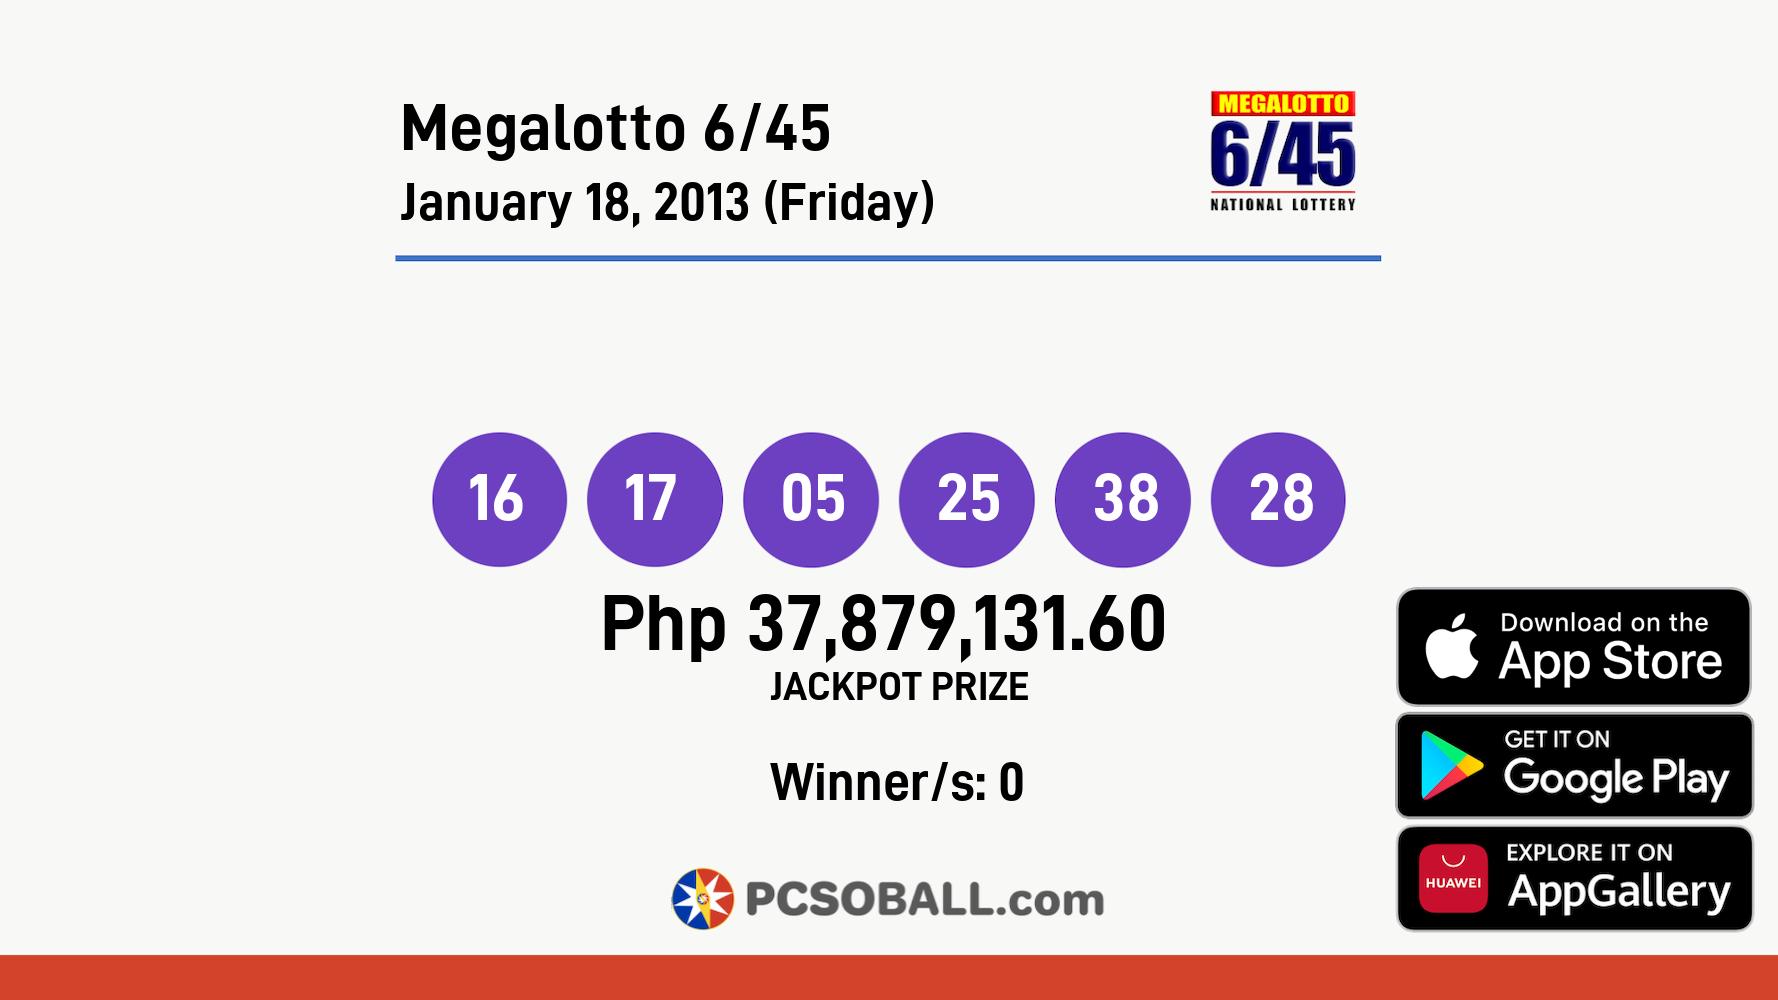 Megalotto 6/45 January 18, 2013 (Friday) Result